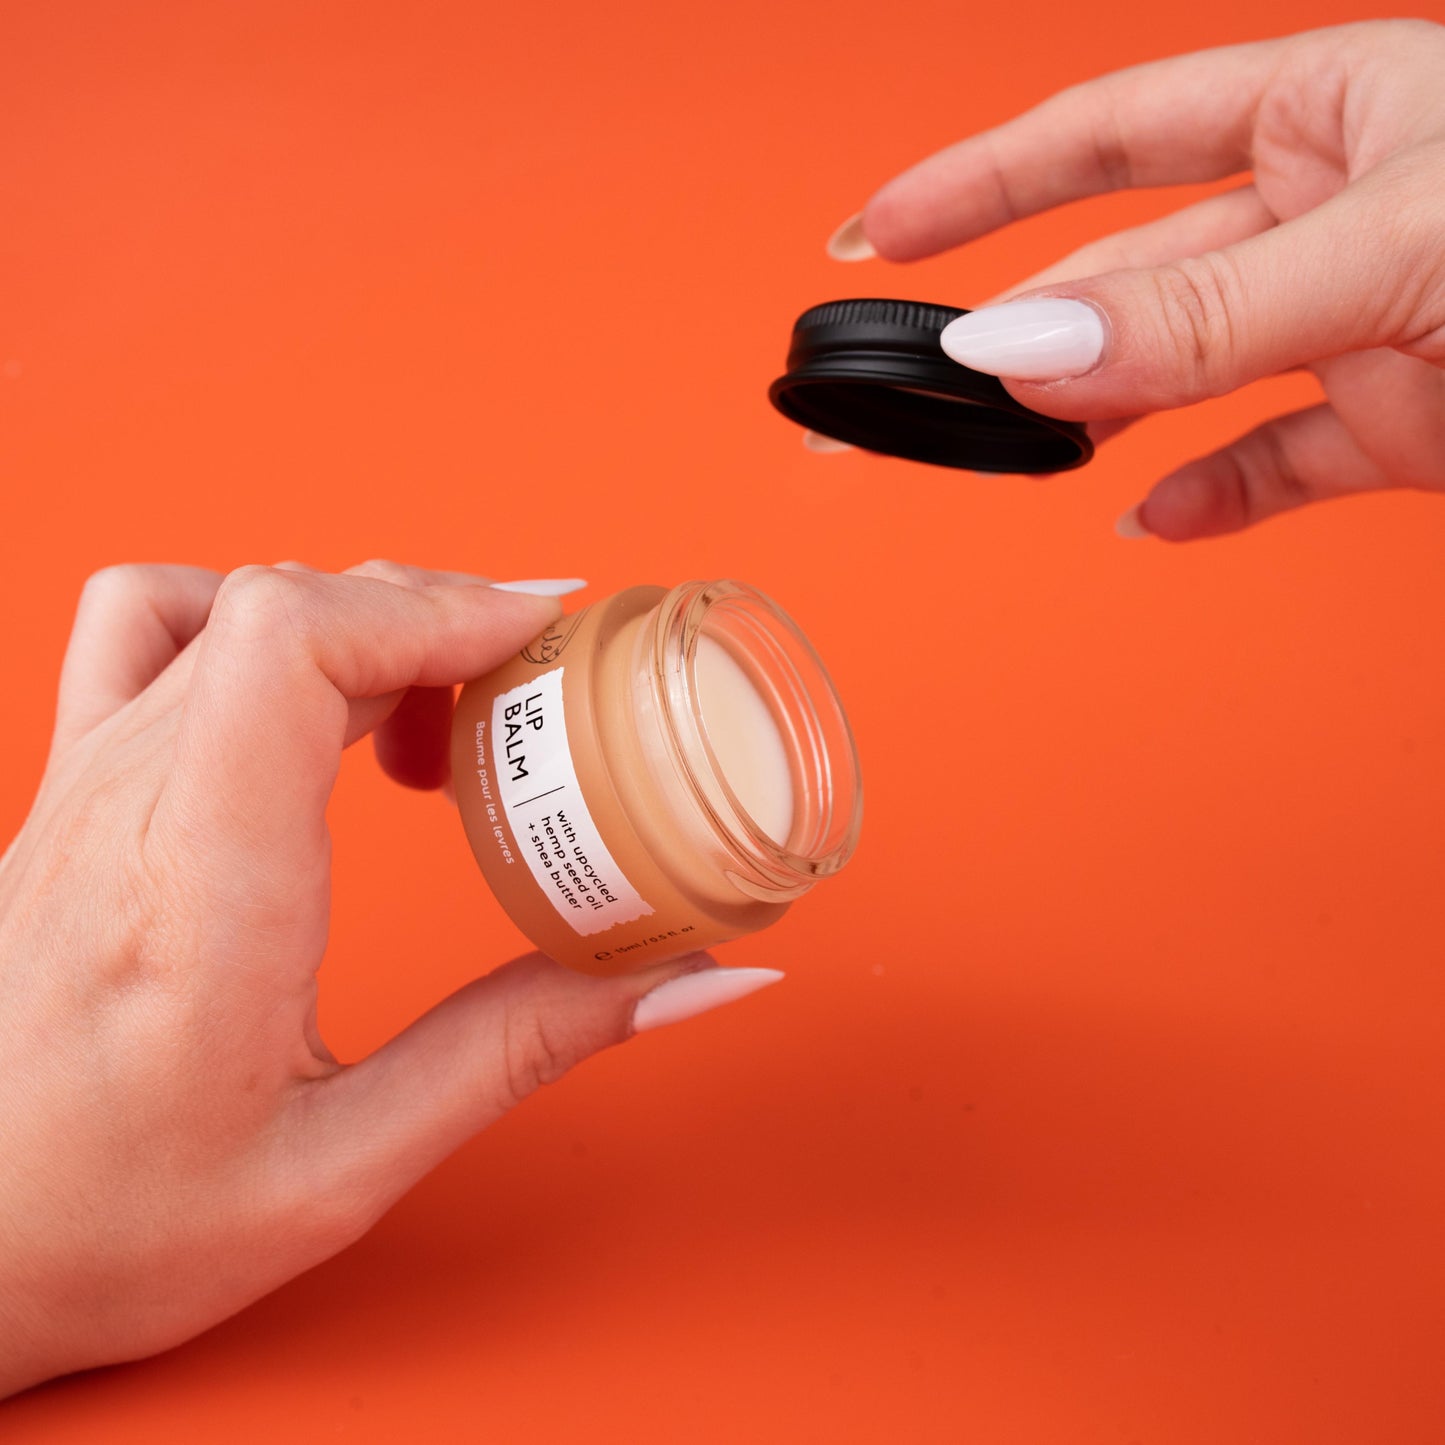 A person's hands are holding an open jar of upcircle lip balm. One hand is holding the jar and the other hand is lifting the black lid. The background is a solid bright orange.